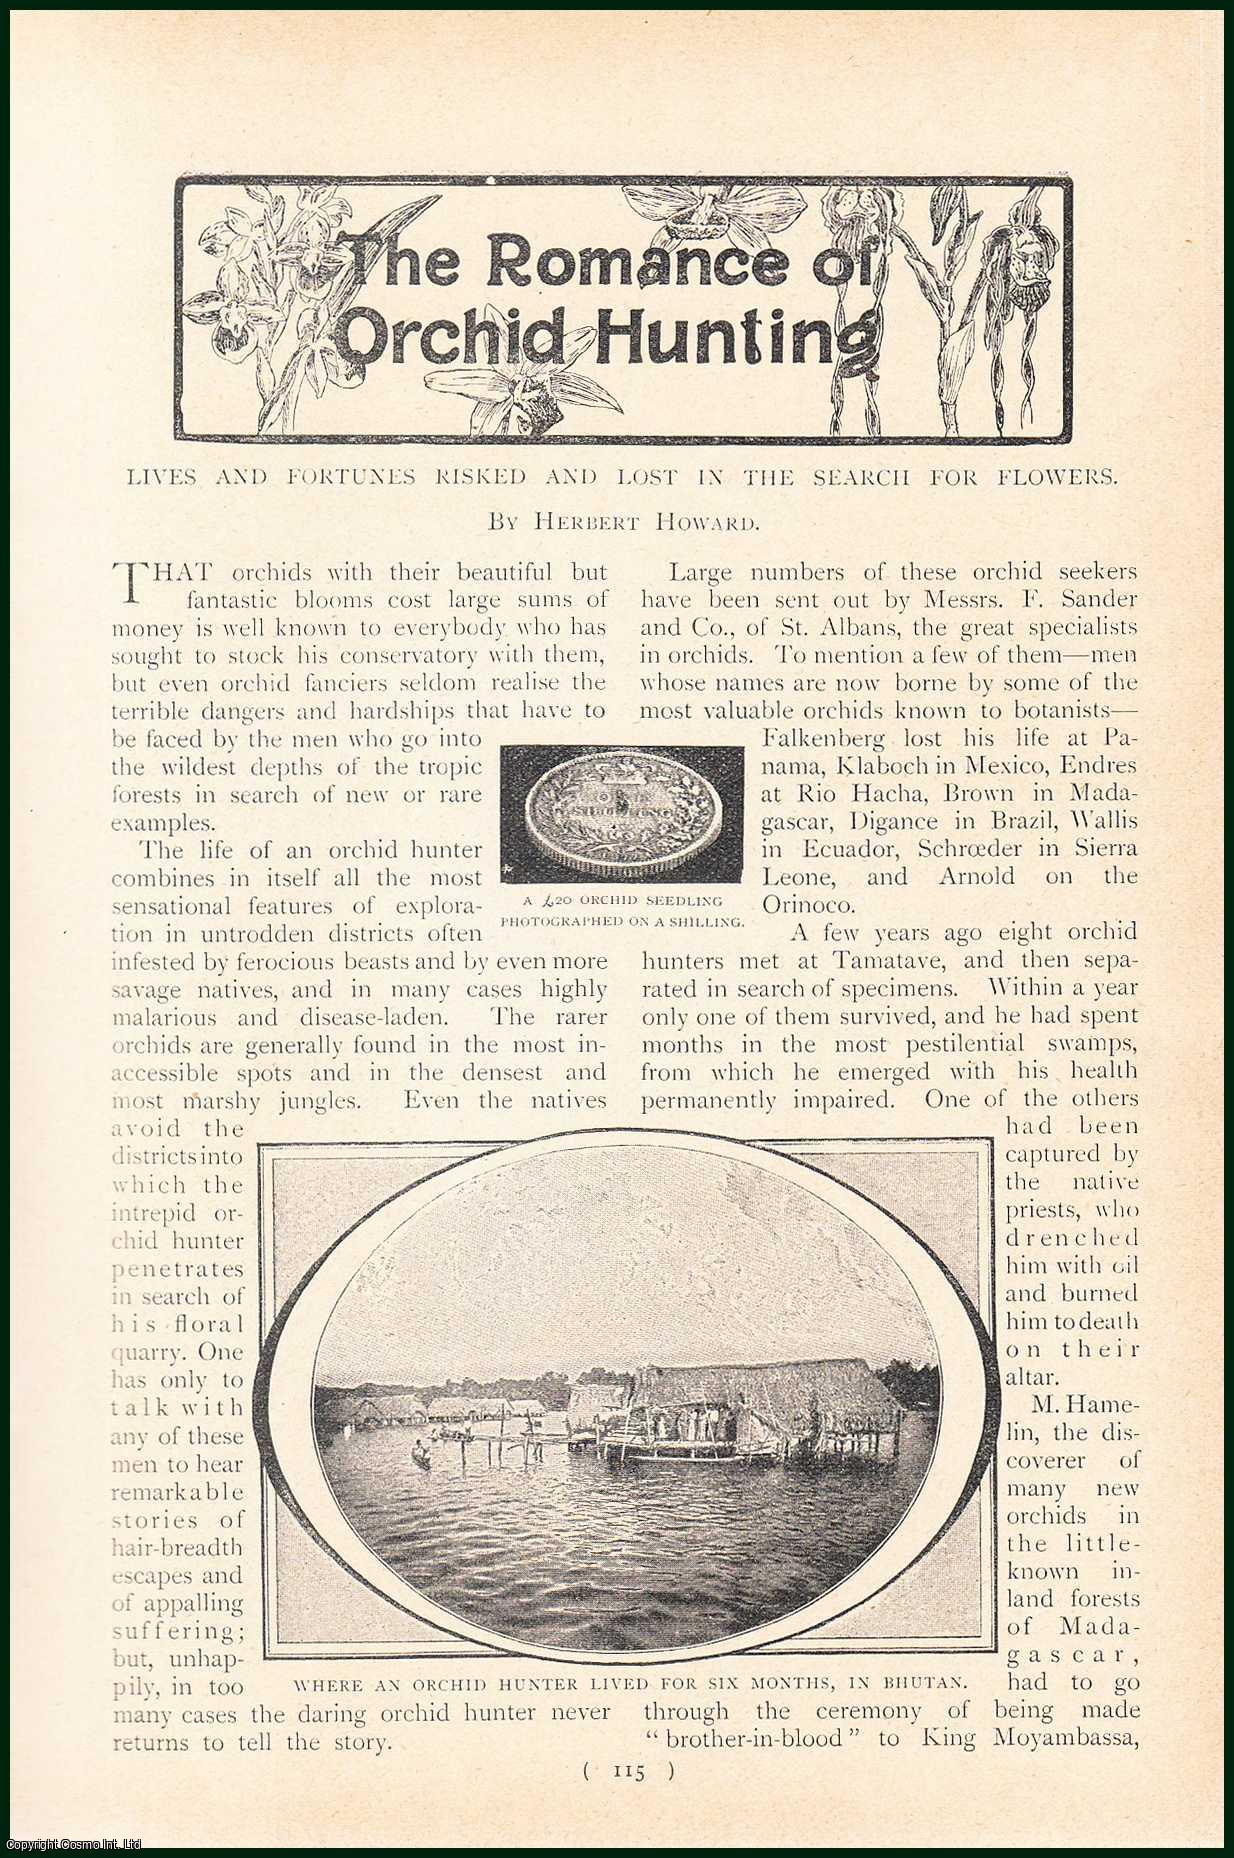 Herbert Howard - The Romance Of Orchid Hunting : Lives & Fortunes Risked & Lost In The Search For Flowers. An uncommon original article from the Harmsworth London Magazine, 1902.